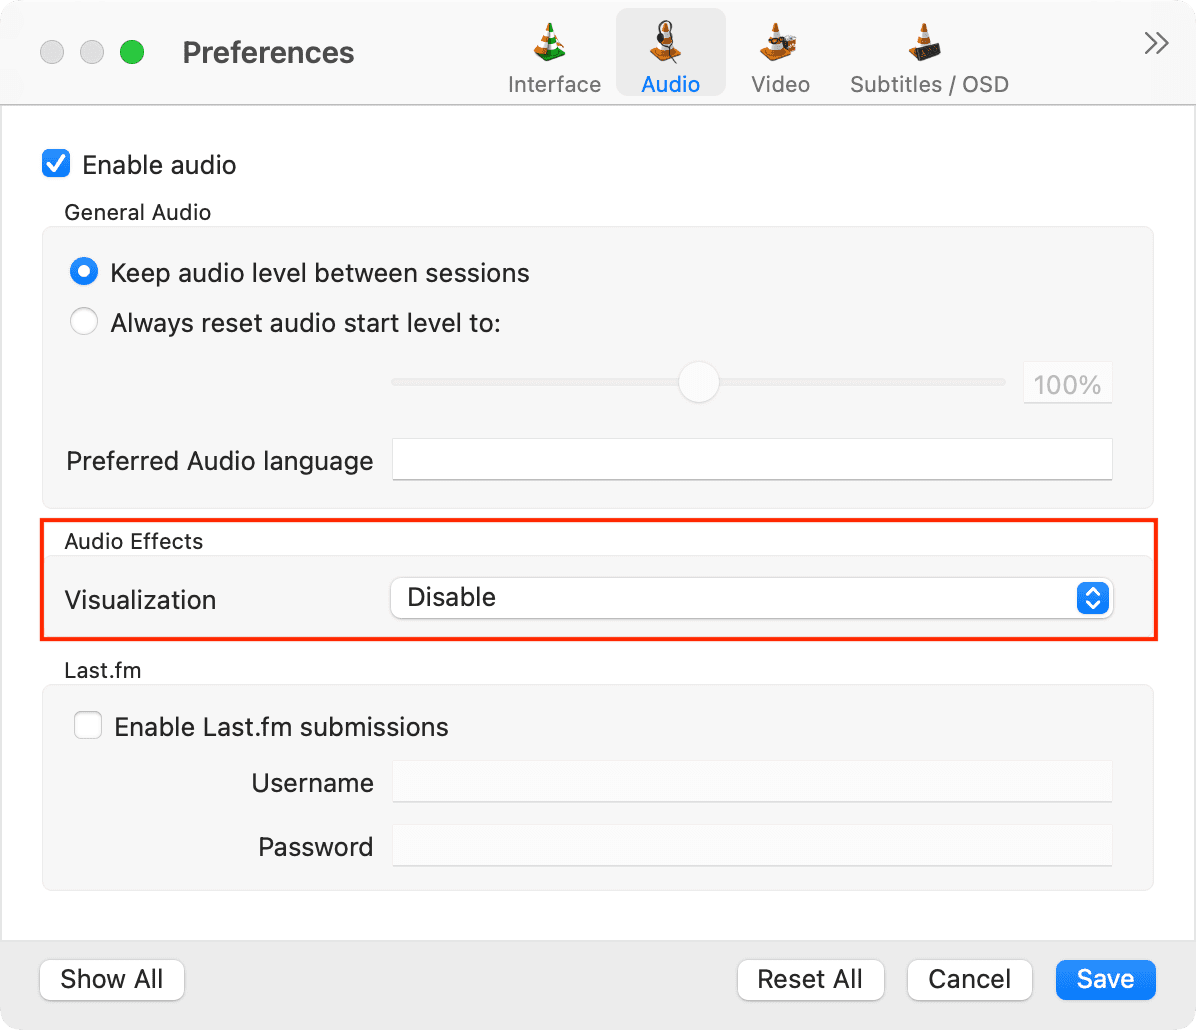 Disable Audio Effects in VLC settings on Mac